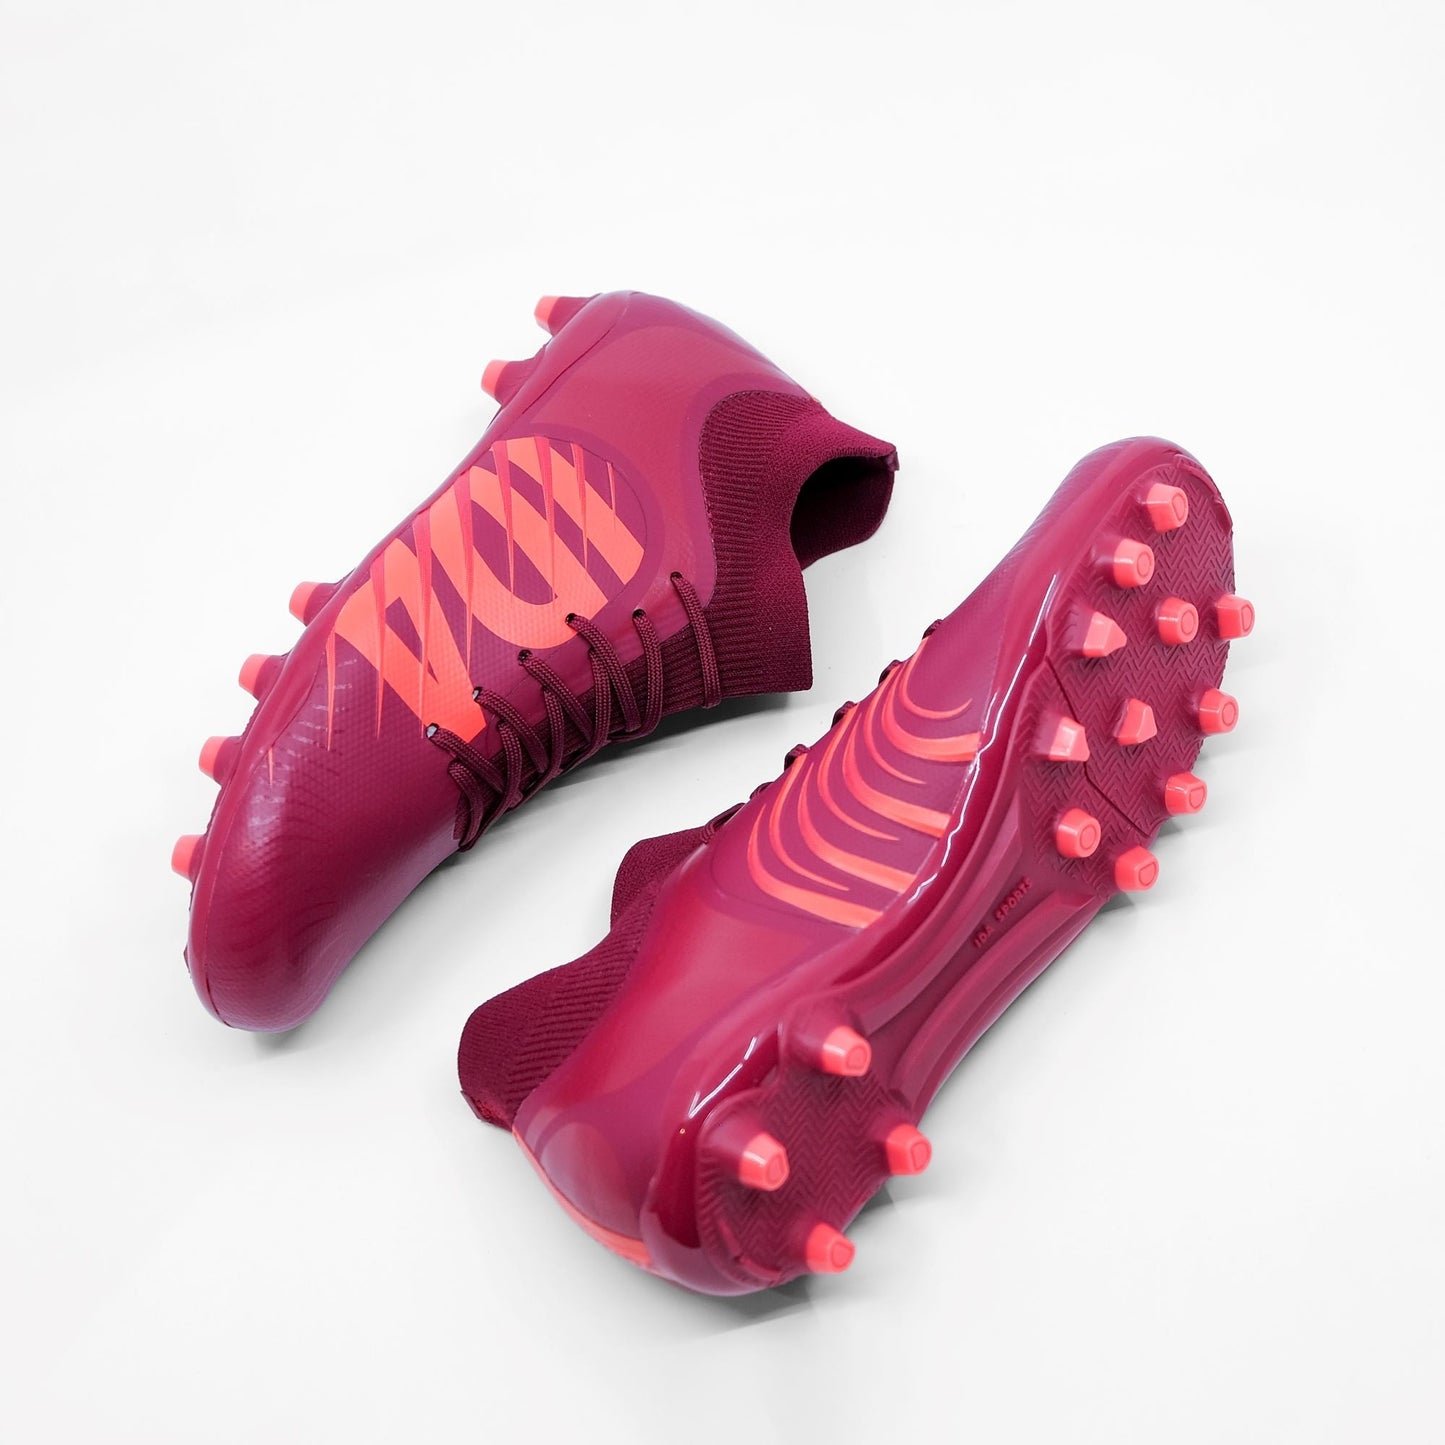 IDA Rise Women's Soccer Cleat, Burgundy, FG/AG, Firm Ground, Artificial Ground, Ankle sock